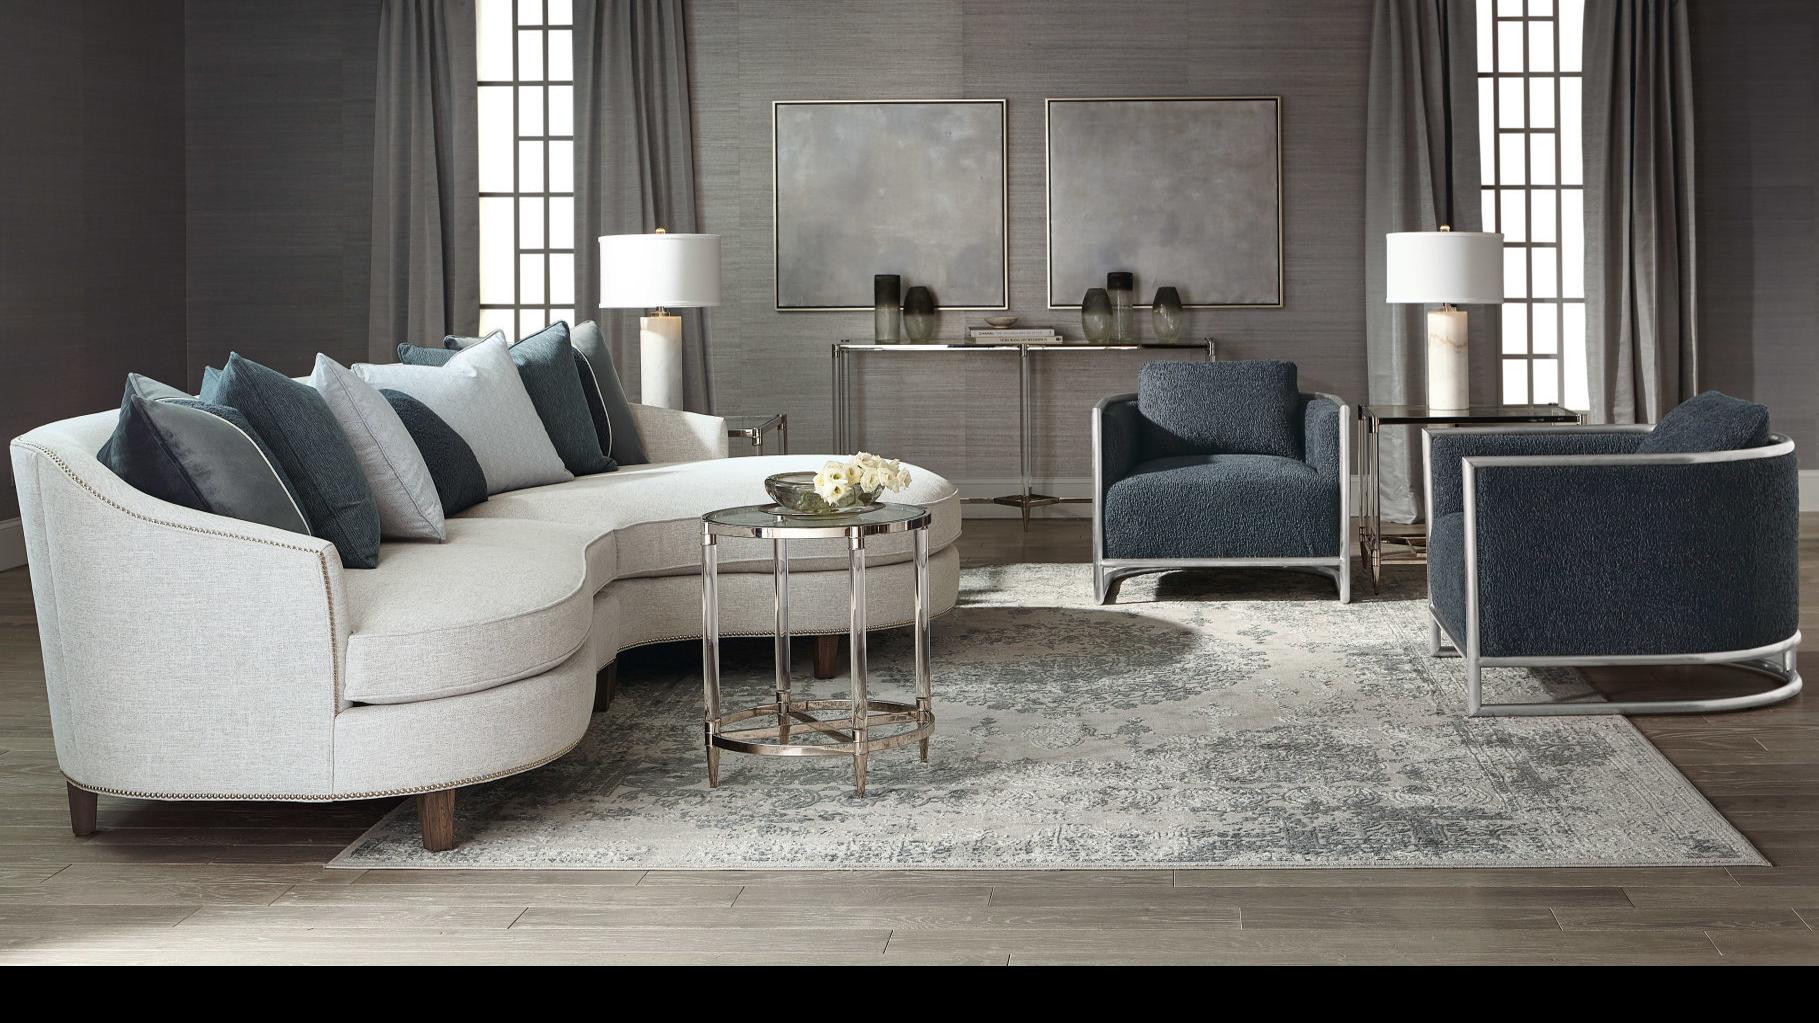 Home Trends For 2020 Furniture Flow For Open Floor Plans Life Style Magazine Thesouthern Com